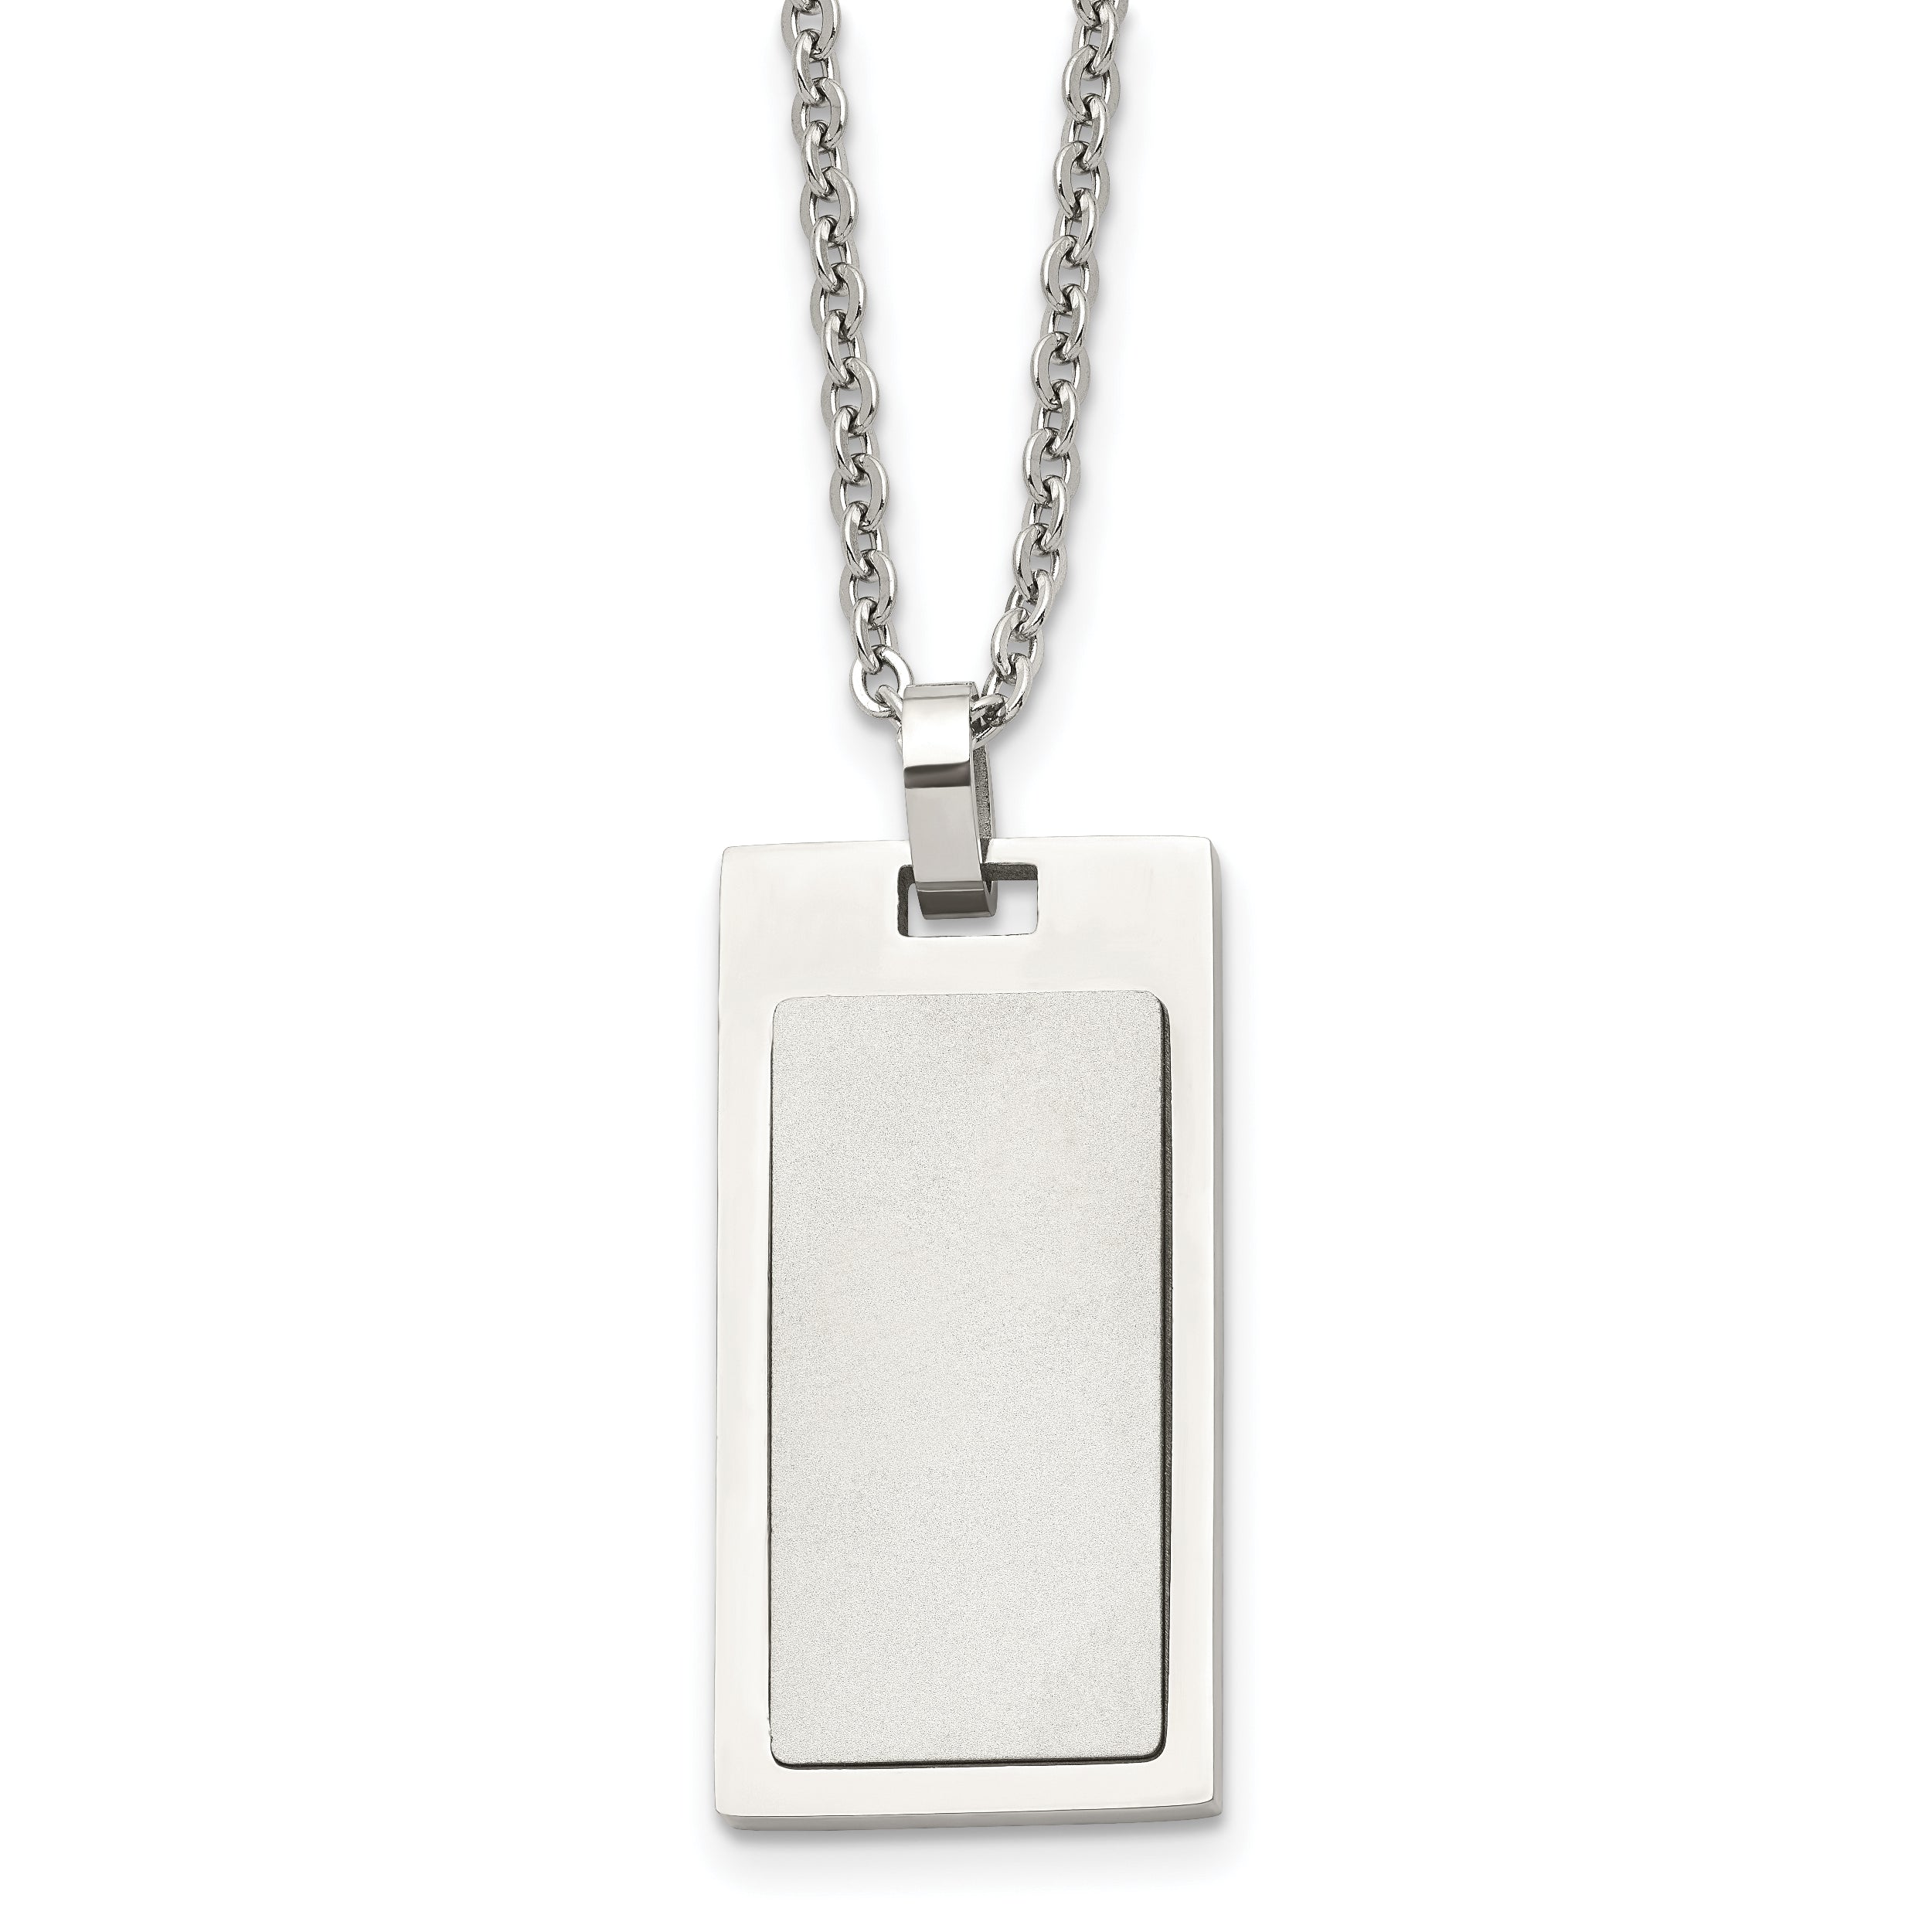 Chisel Stainless Steel Brushed and Polished Rectangle Dog Tag on a 22 inch Cable Chain Necklace